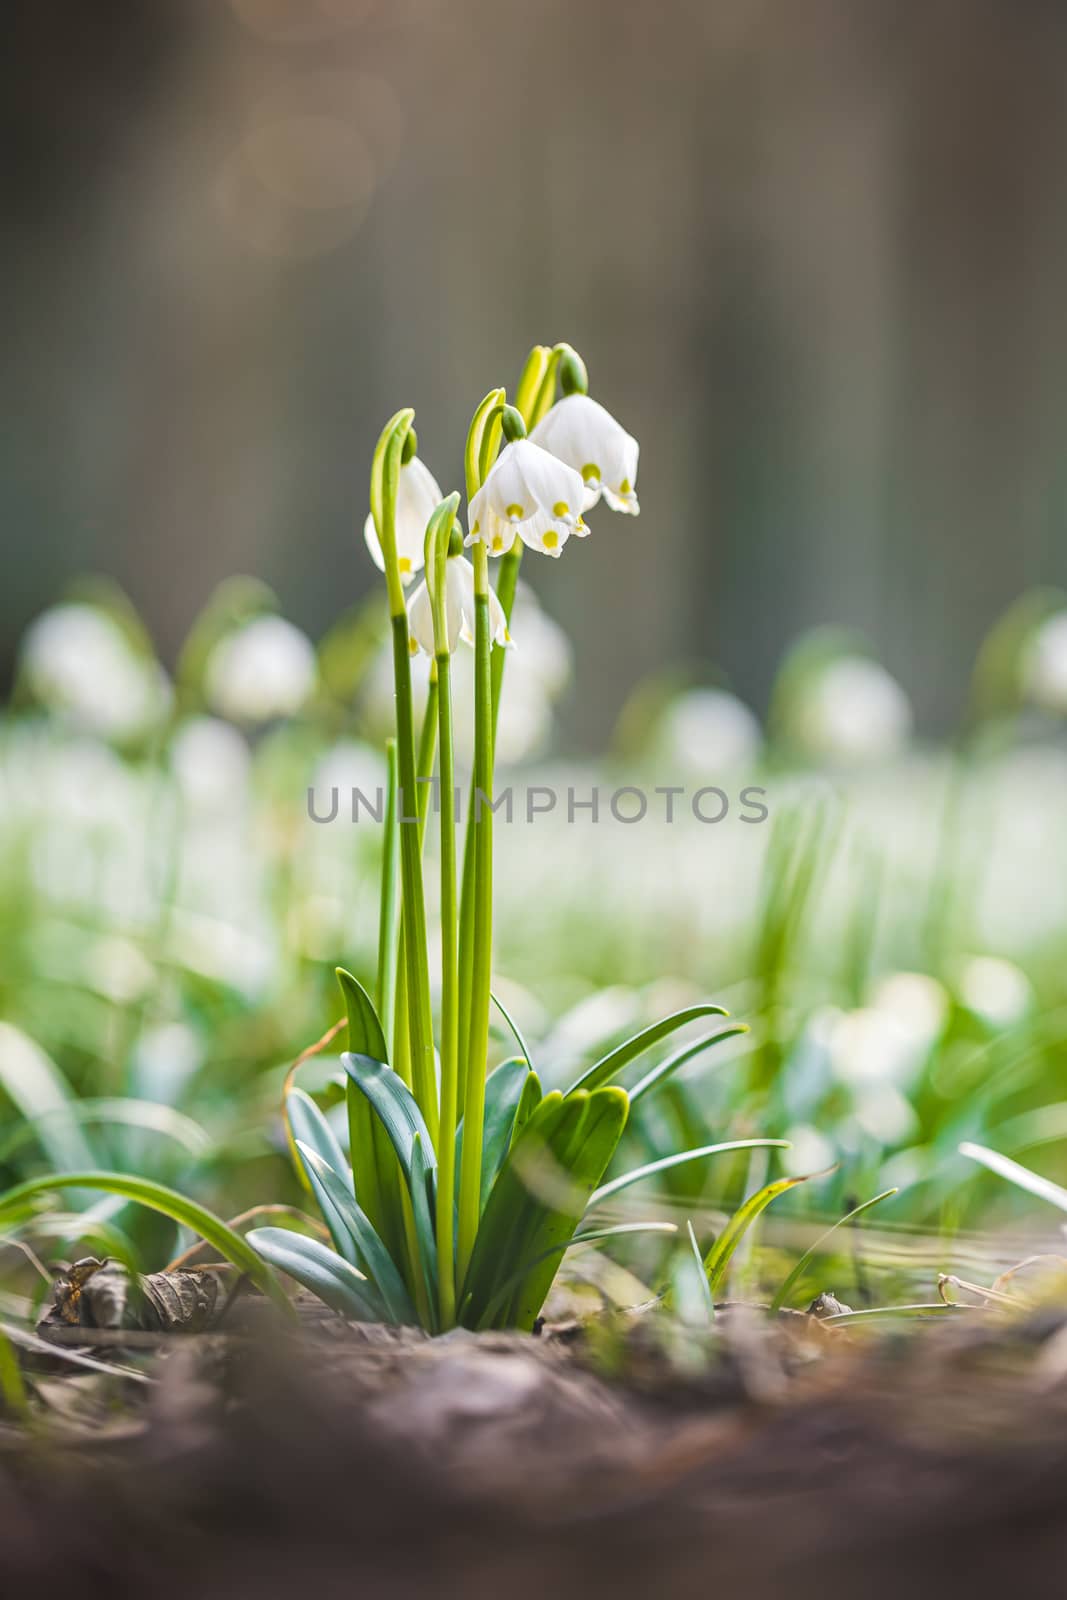 Leucojum vernum or spring snowflake - blooming white flowers in early spring in the forest, closeup macro picture. by petrsvoboda91